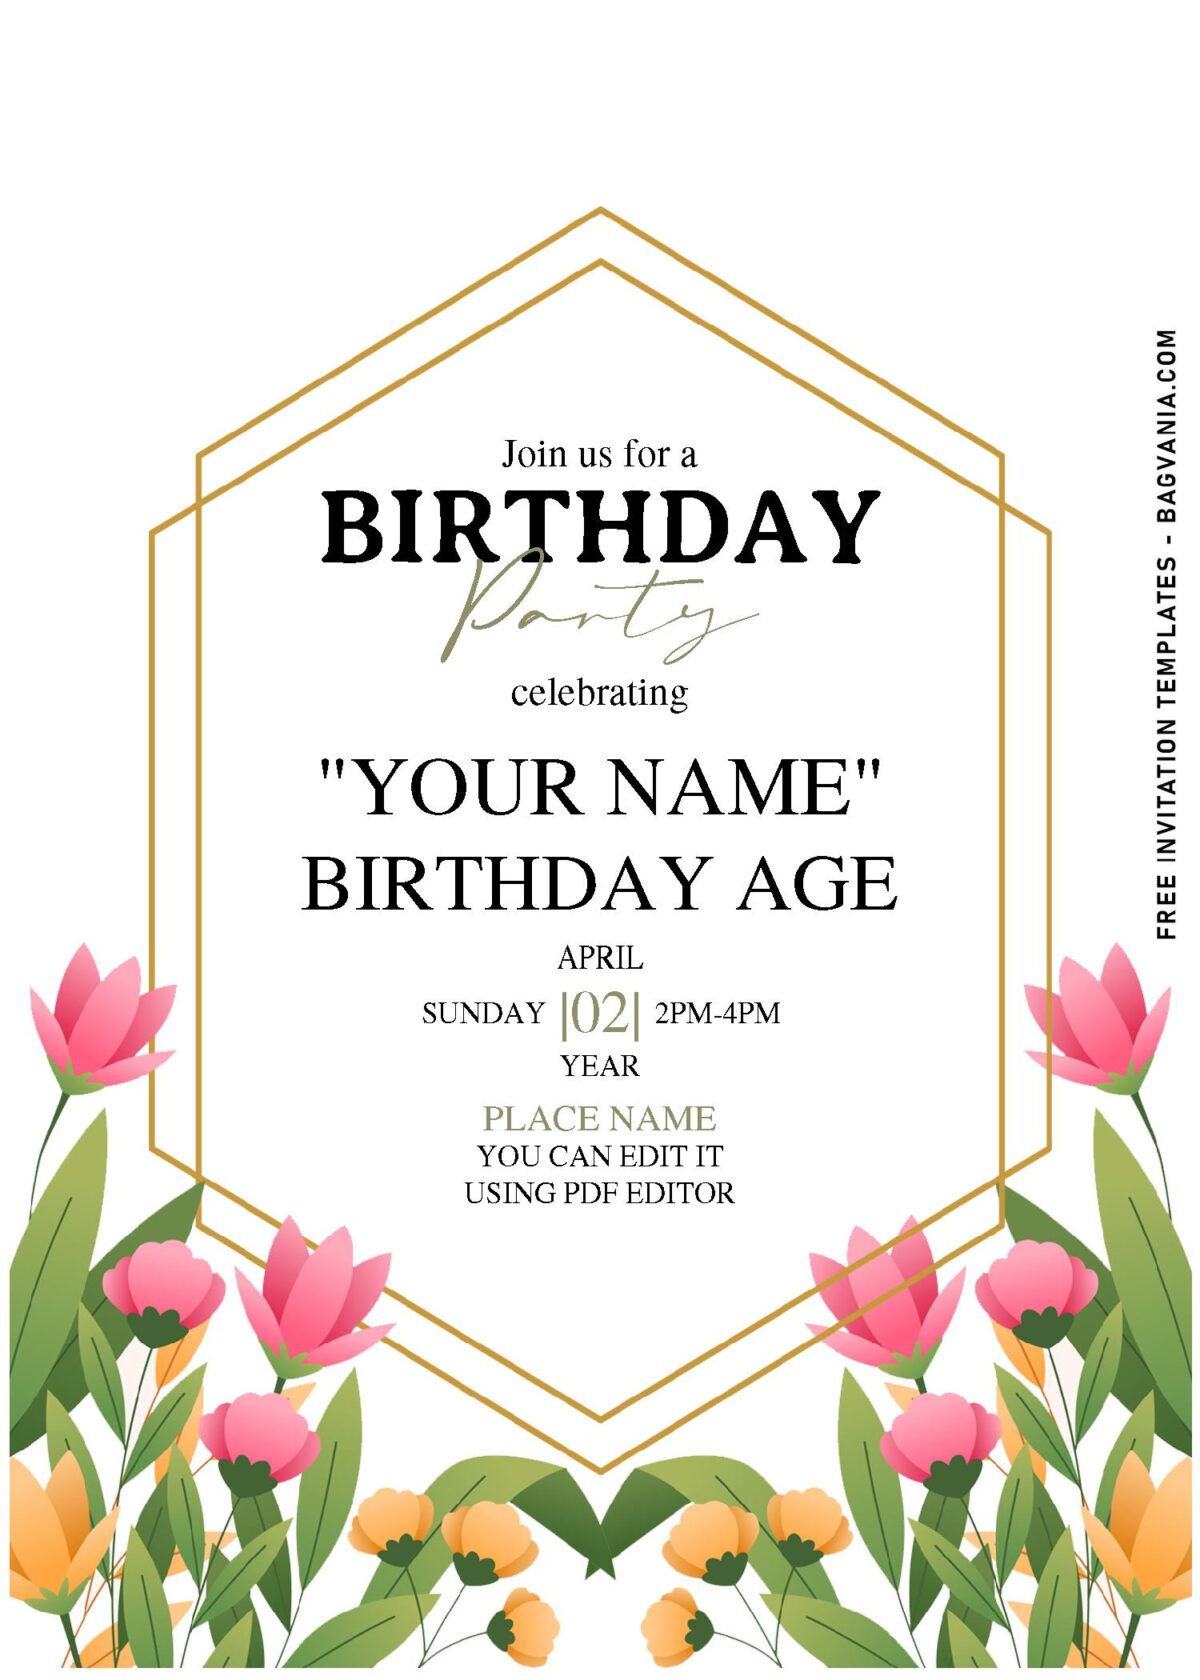 (Free Editable PDF) Geometric Gold And Floral Perfection Birthday Invitation Templates with elegant gold asymmetric frame